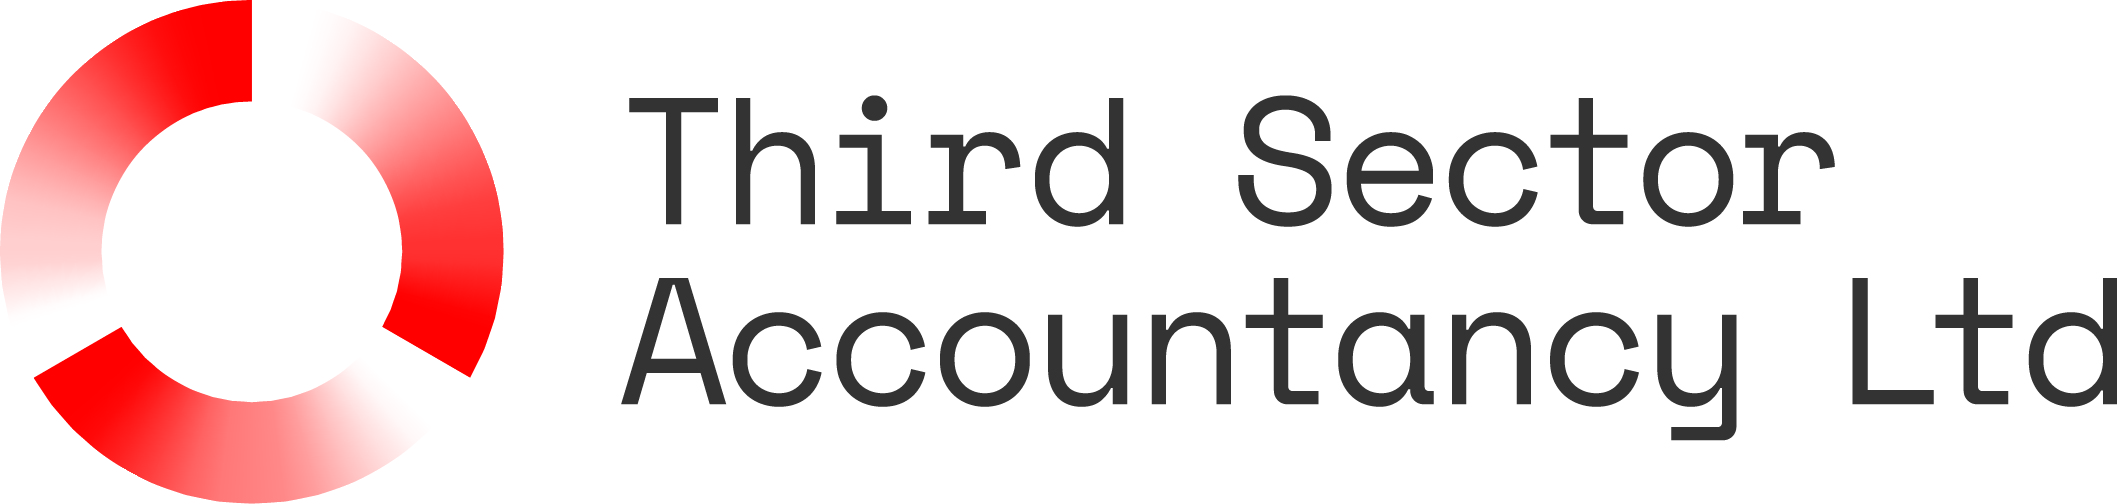 logo for Third Sector Accountancy